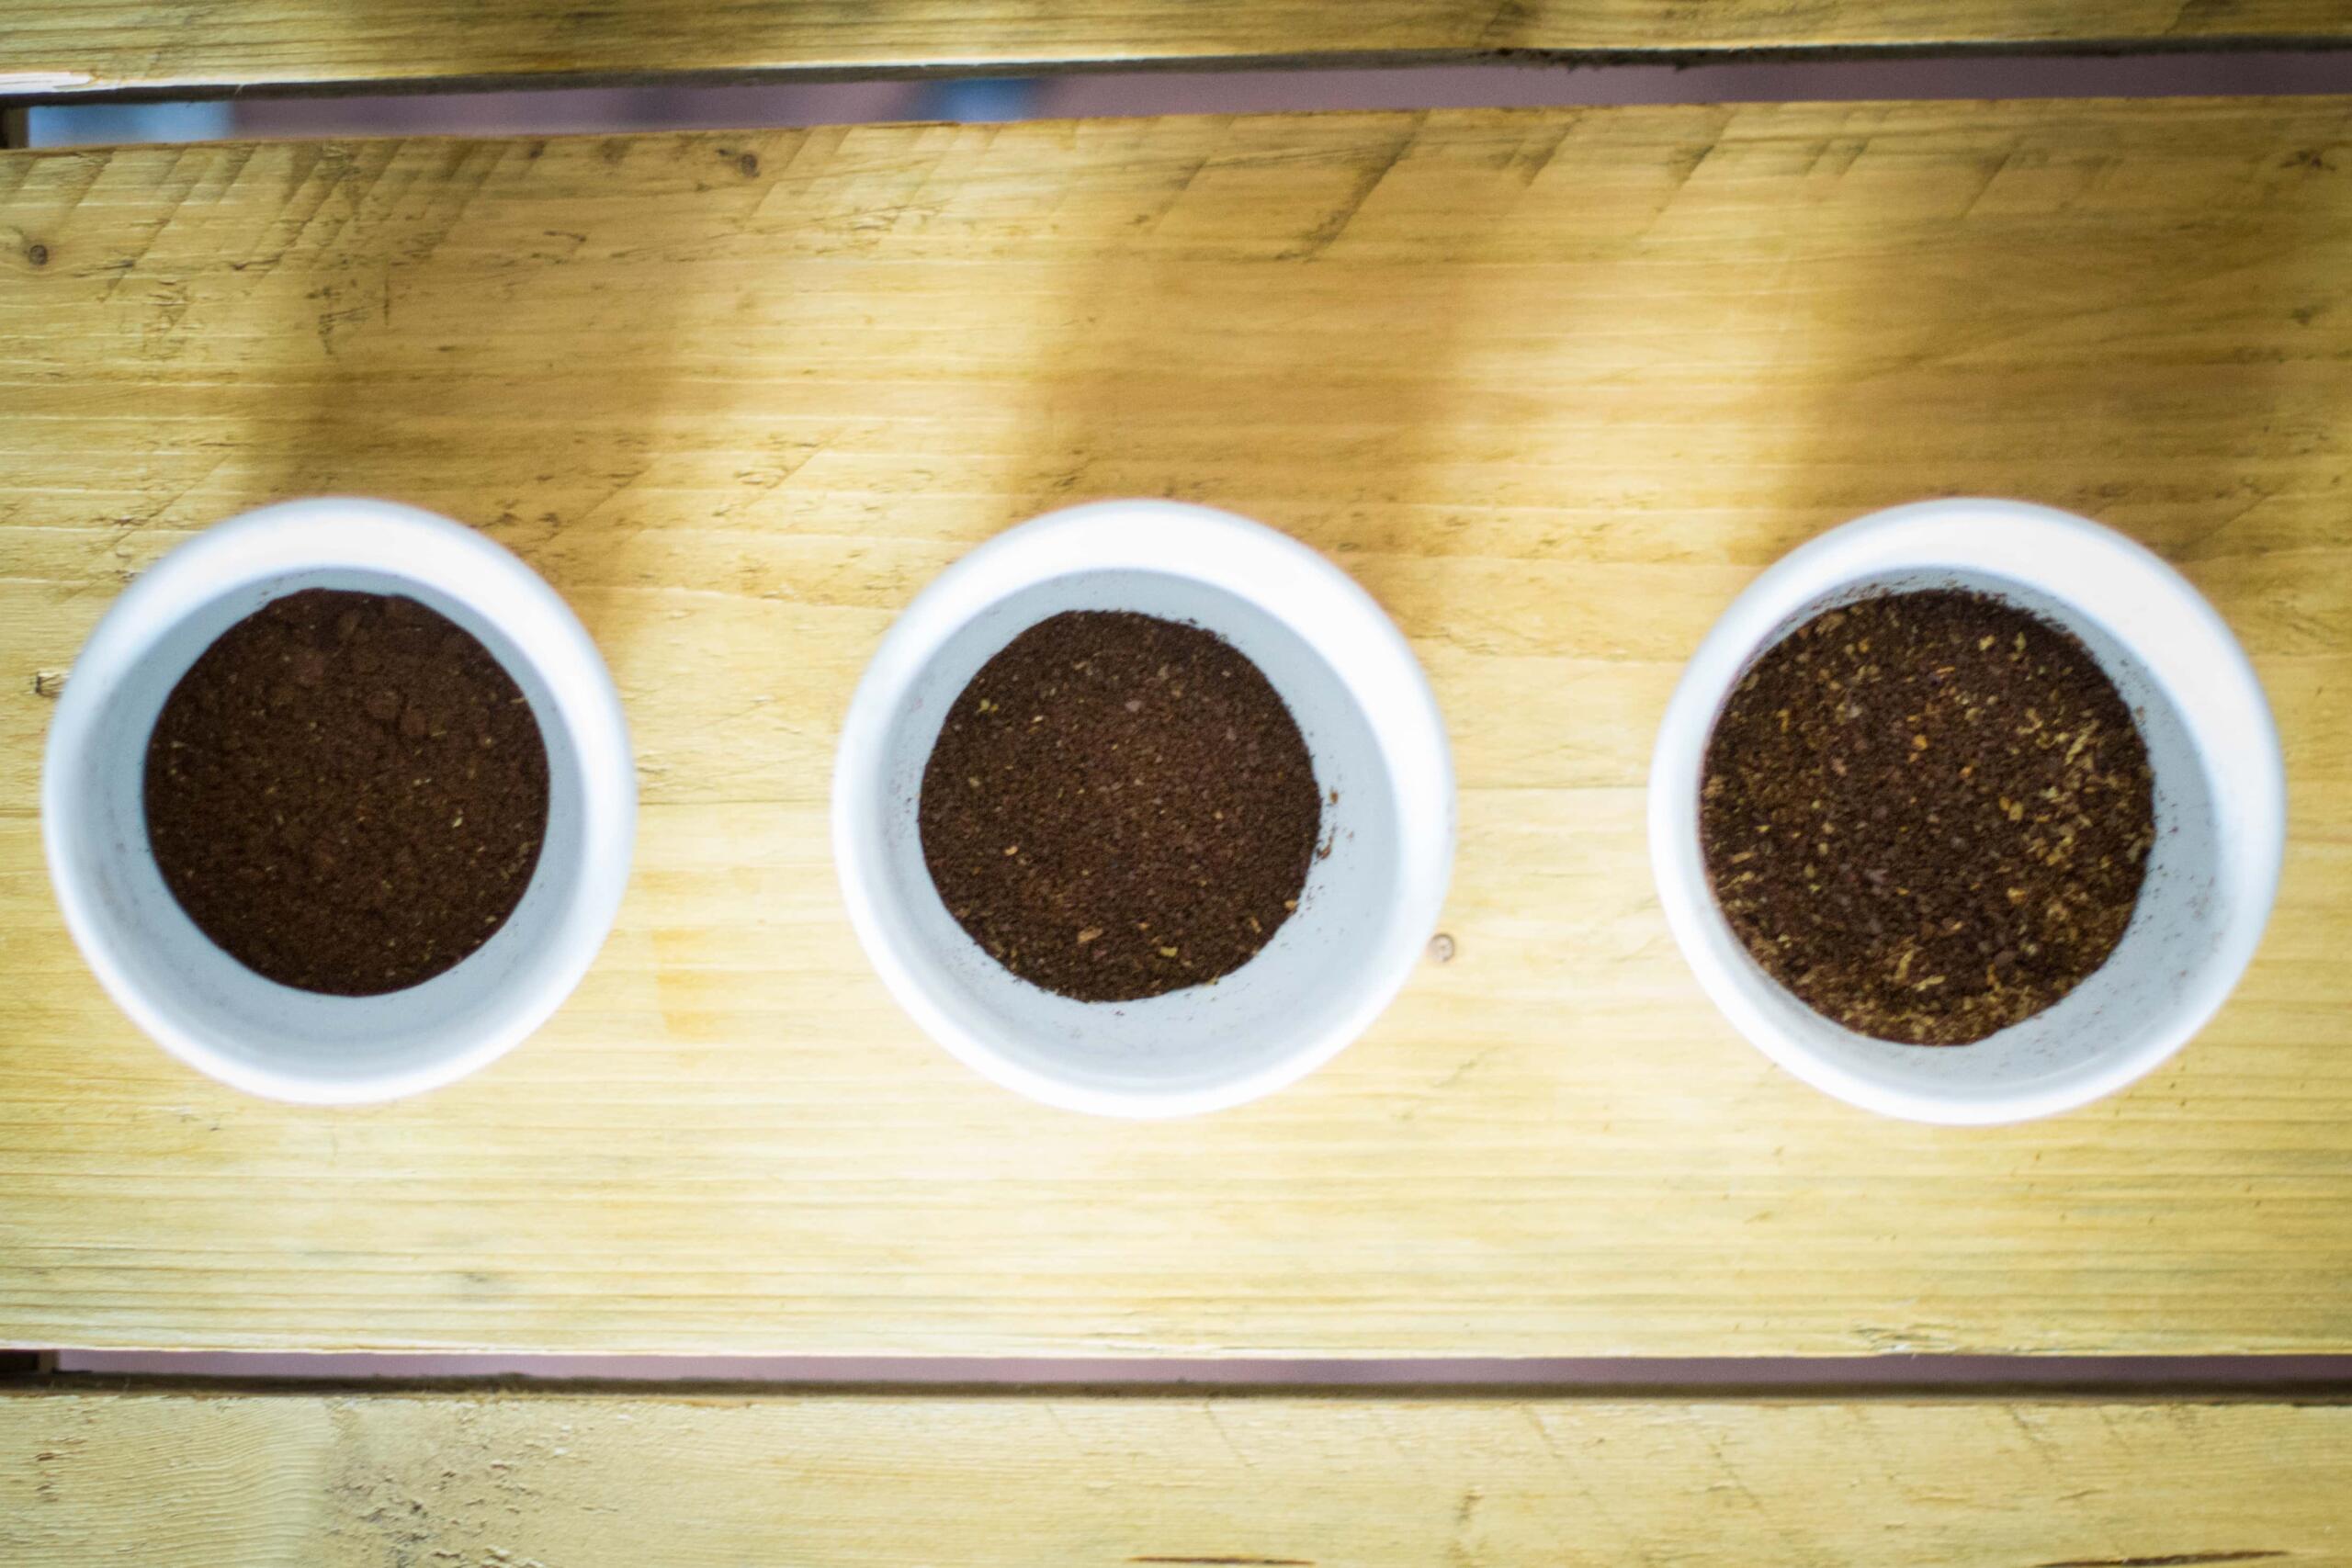 Three samples of ground coffee from above 